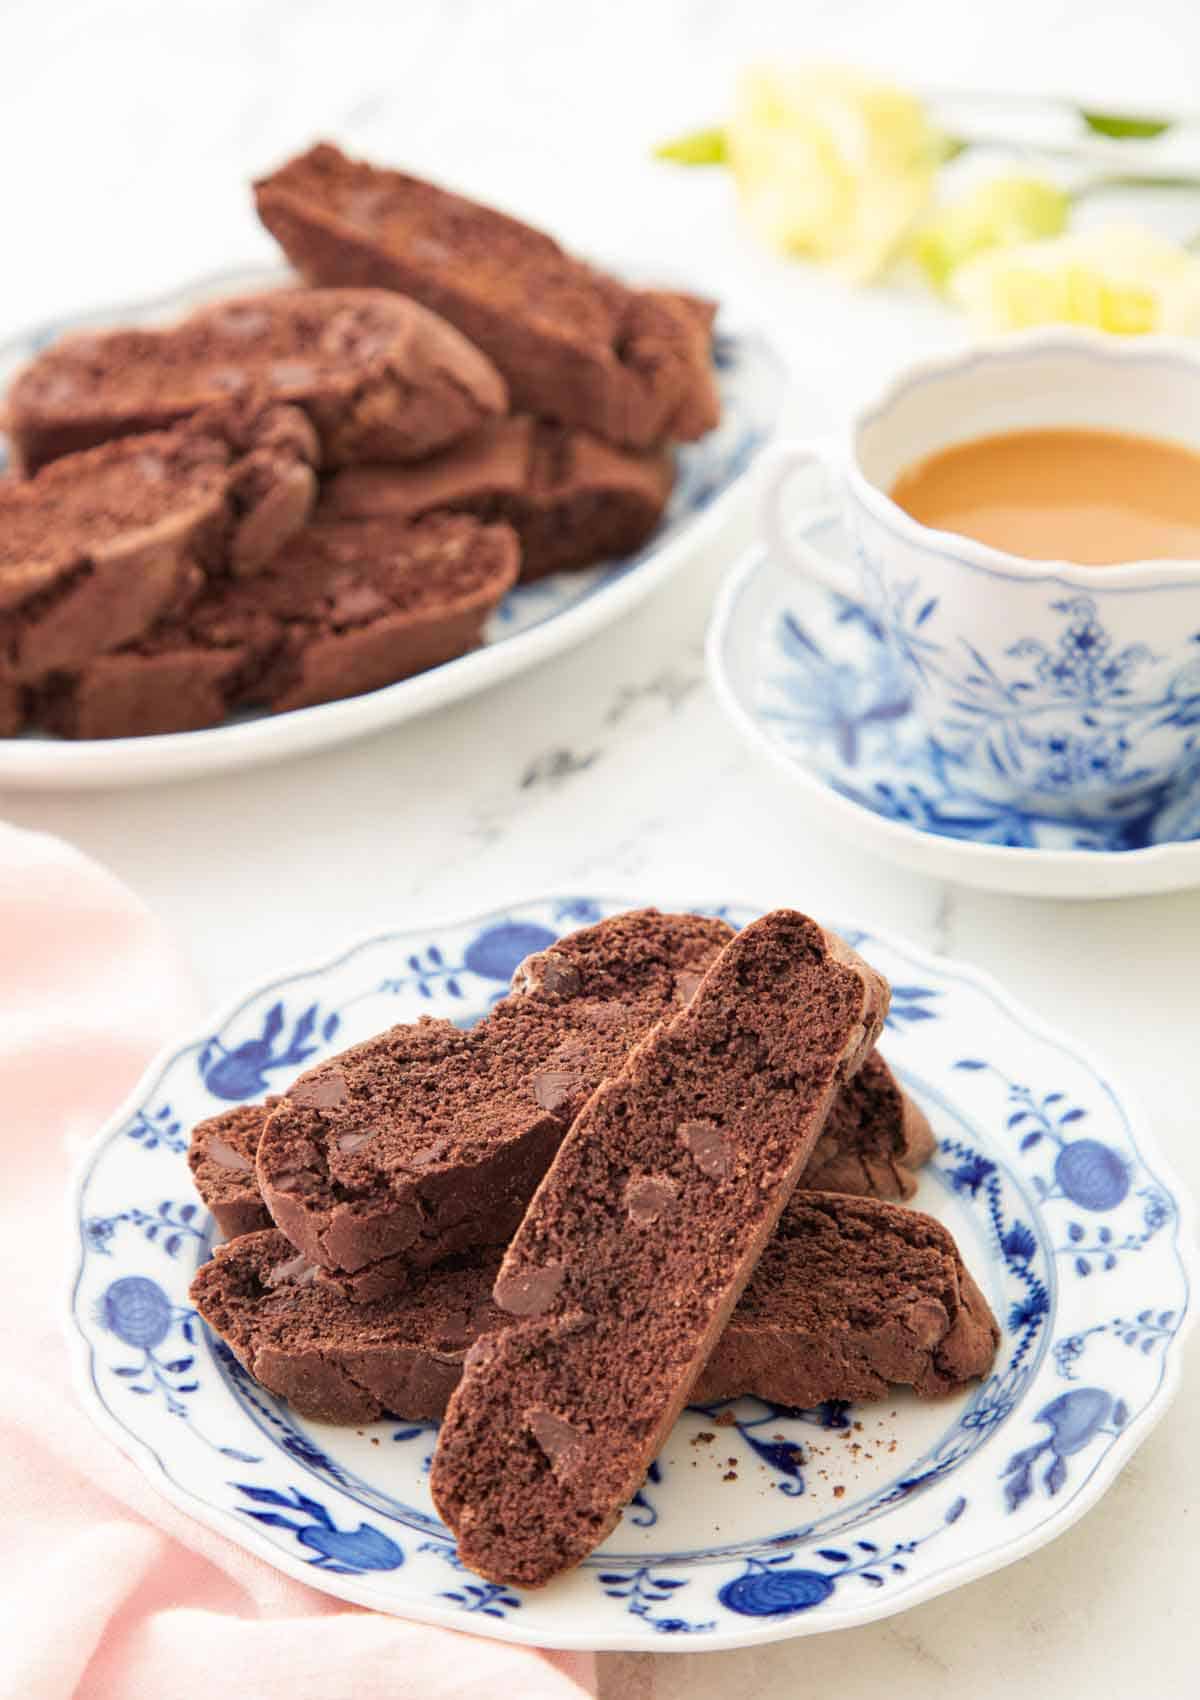 A plate with multiple chocolate biscottis with a cup of coffee and more biscotti in the background.